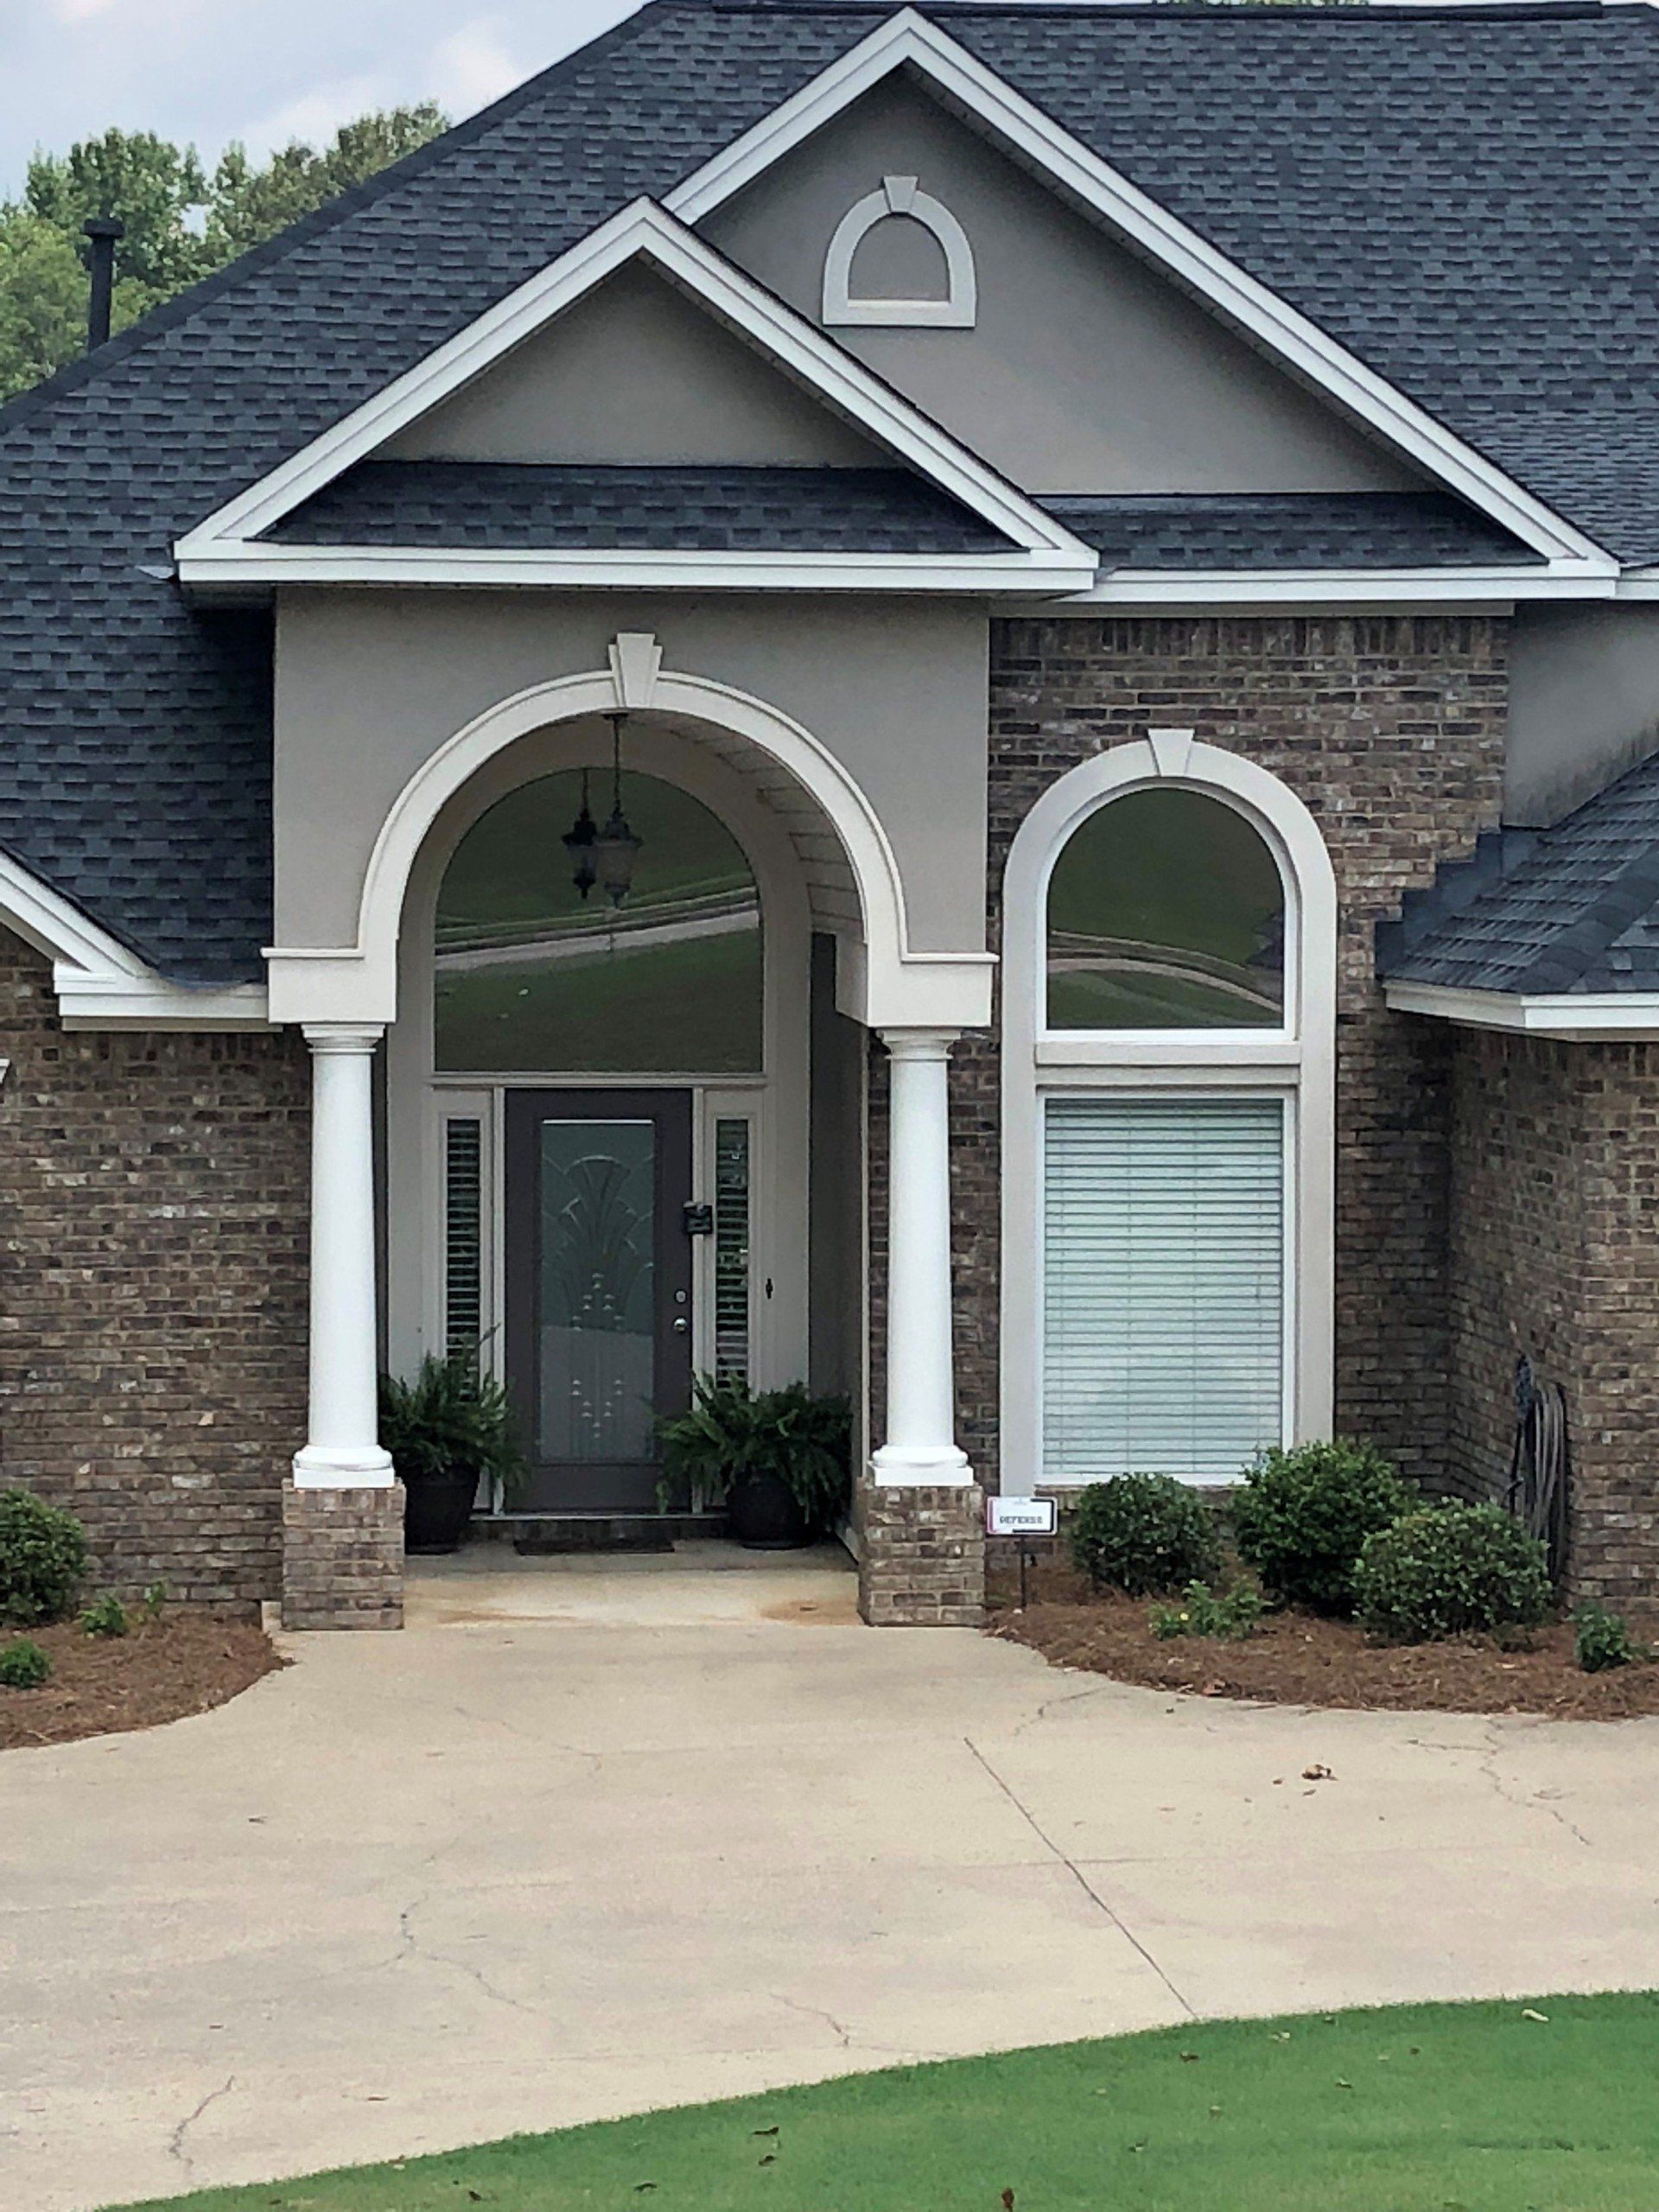 Home window tint installed in Greenville, AL